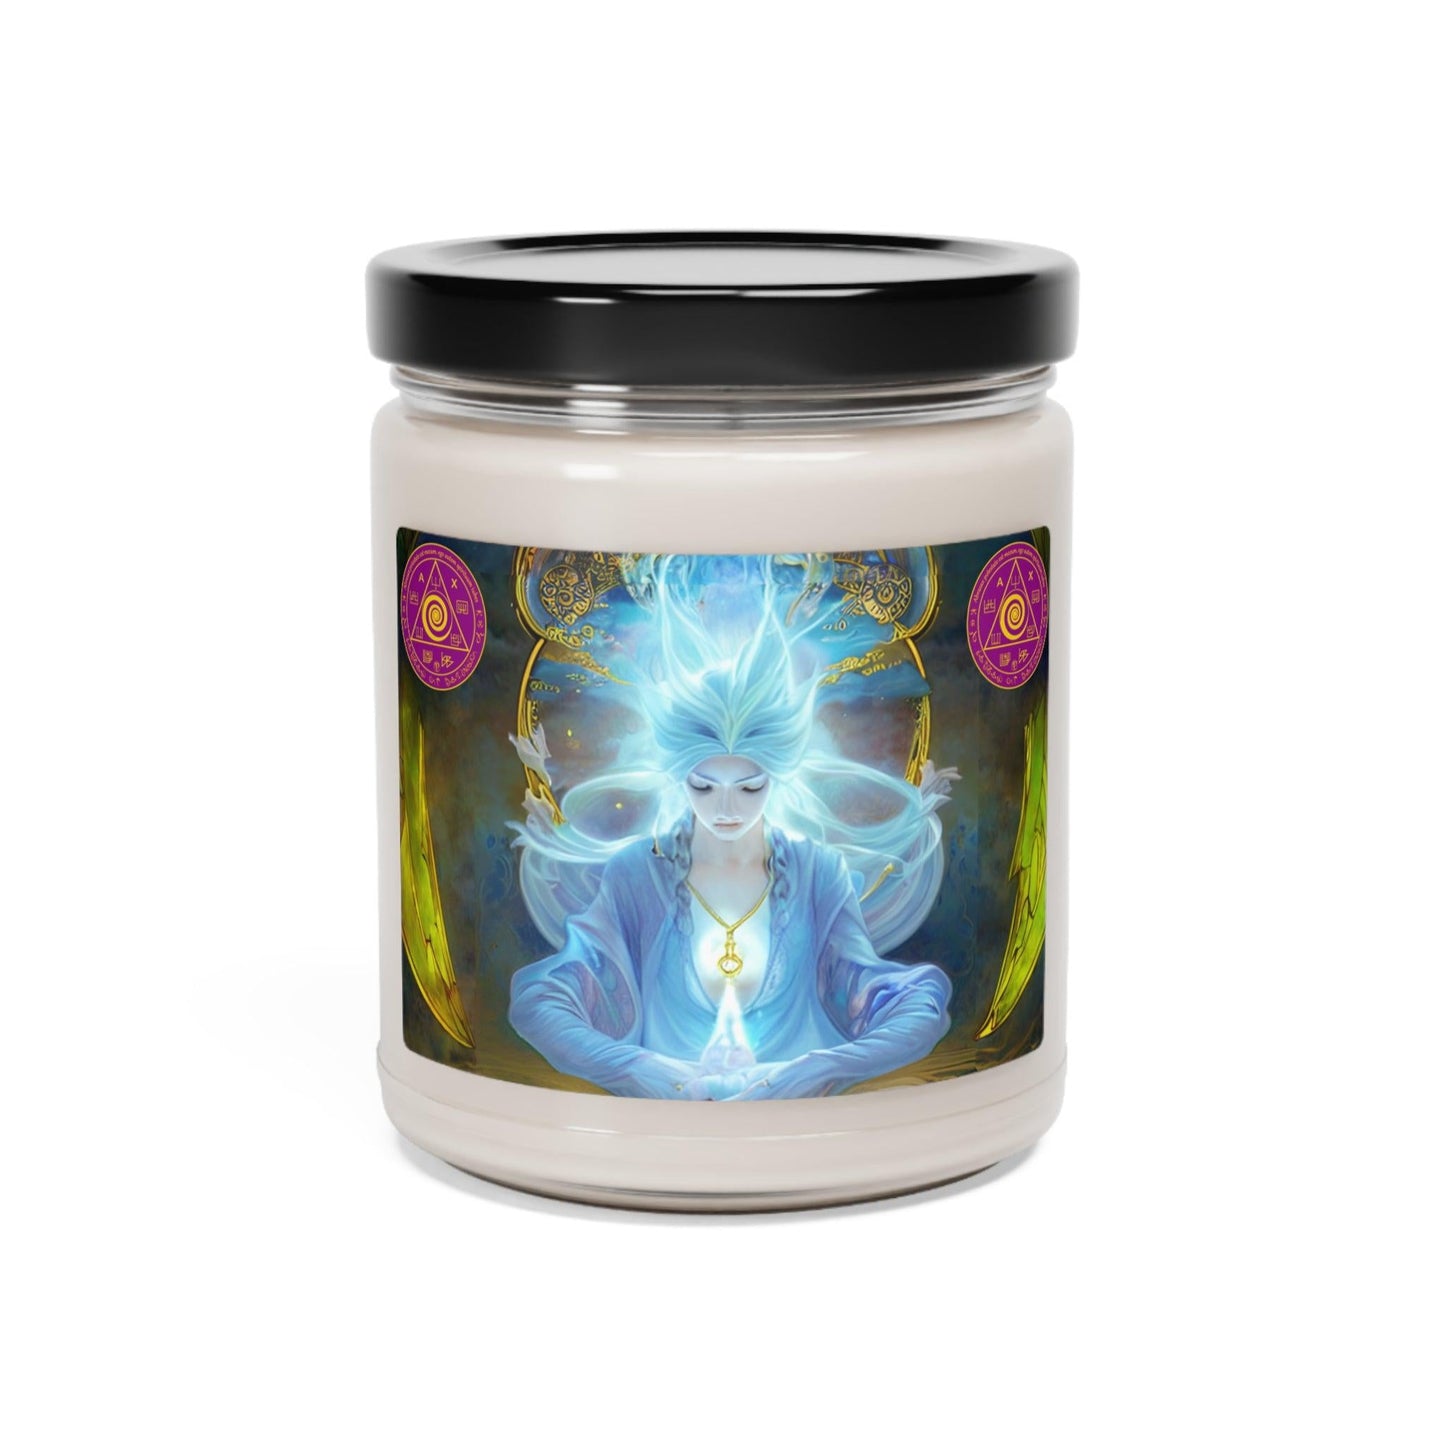 Olympic-Spirits-Cleansing-and-Protection-Scented-Soy Candle-for-offerings-rituals-initiations-or-praying-and-meditation-11